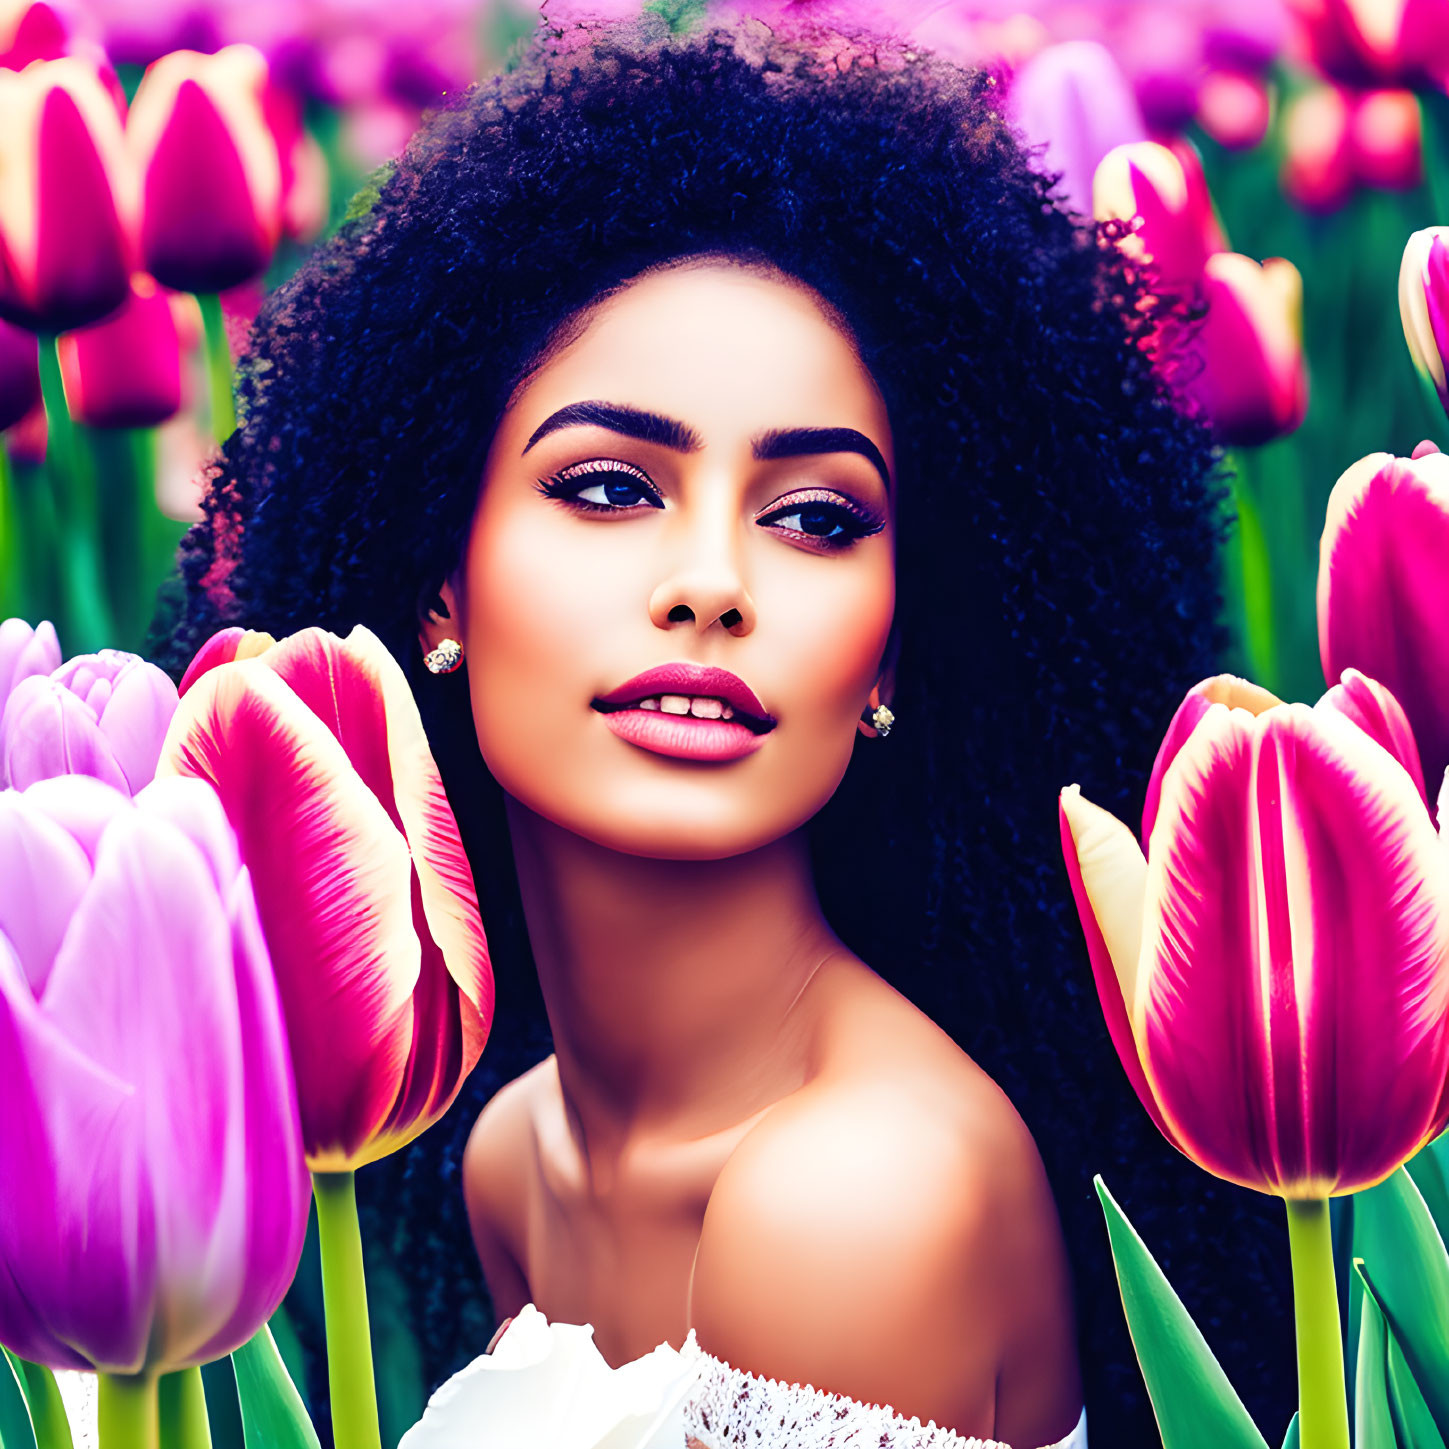 Curly-Haired Woman Surrounded by Vibrant Tulips in Elegant Pose